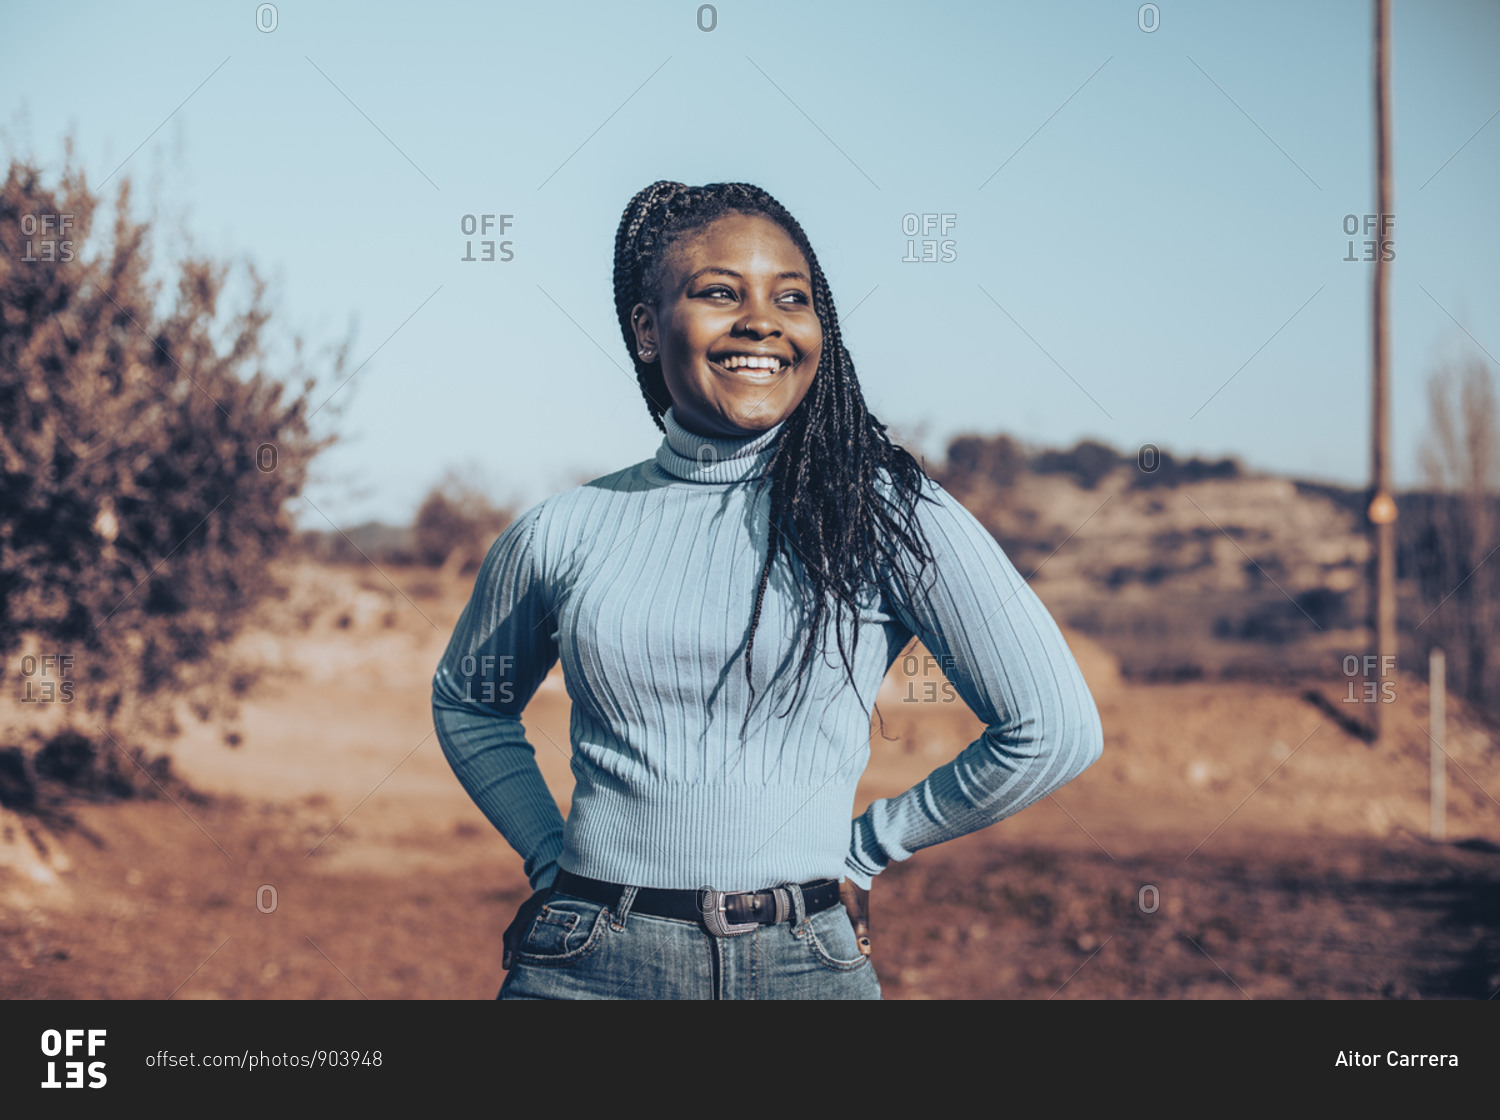 Smiling woman with braids wearing a blue turtleneck sweater standing in a rural setting